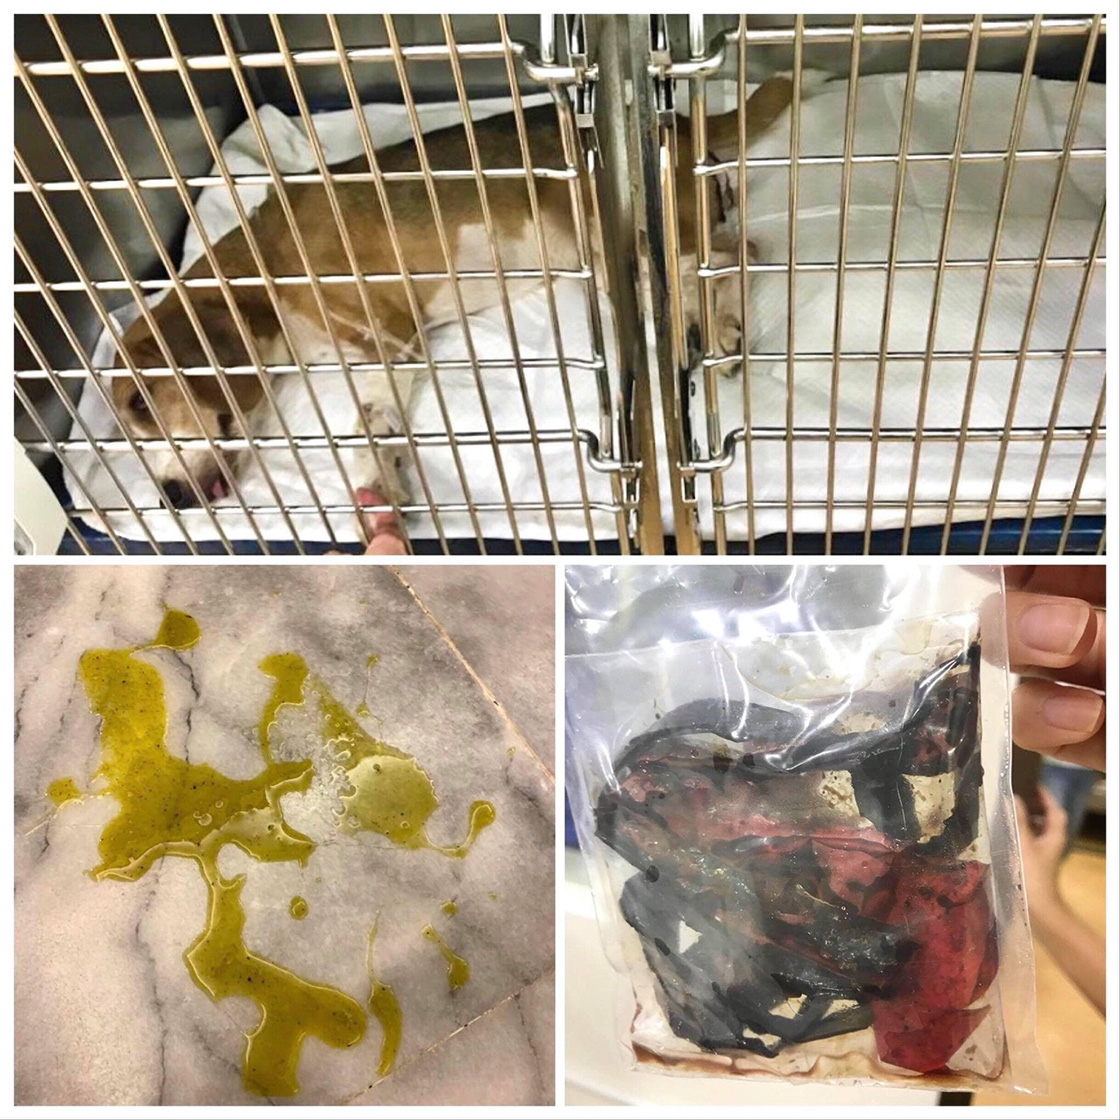 A collage of a dog in postoperative recovery, a vomit stain, and a sealed bag with the foreign body removed during surgery.